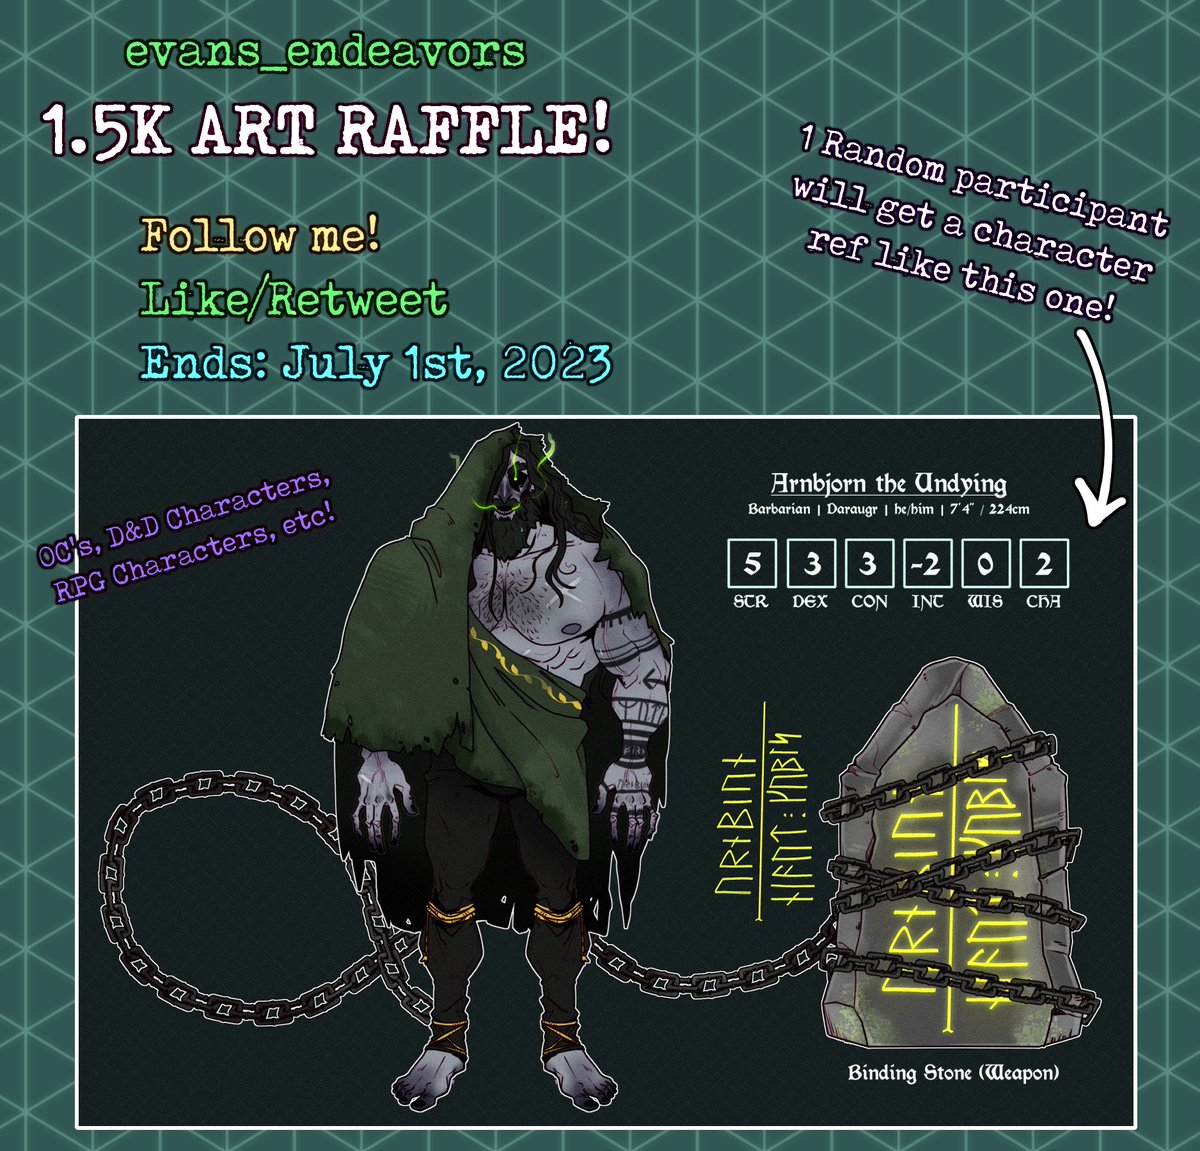 ✨1.5K ART RAFFLE ✨

TO ENTER:
💛Follow me
💚Like/Retweet
💙Ends July 1st, 2023

Winner will get a character ref like the one below!

Feel free to comment with refs for a character! (For my own curiosity. Not required to enter. KEEP IT SFW)

Thanks for all the support! 💚